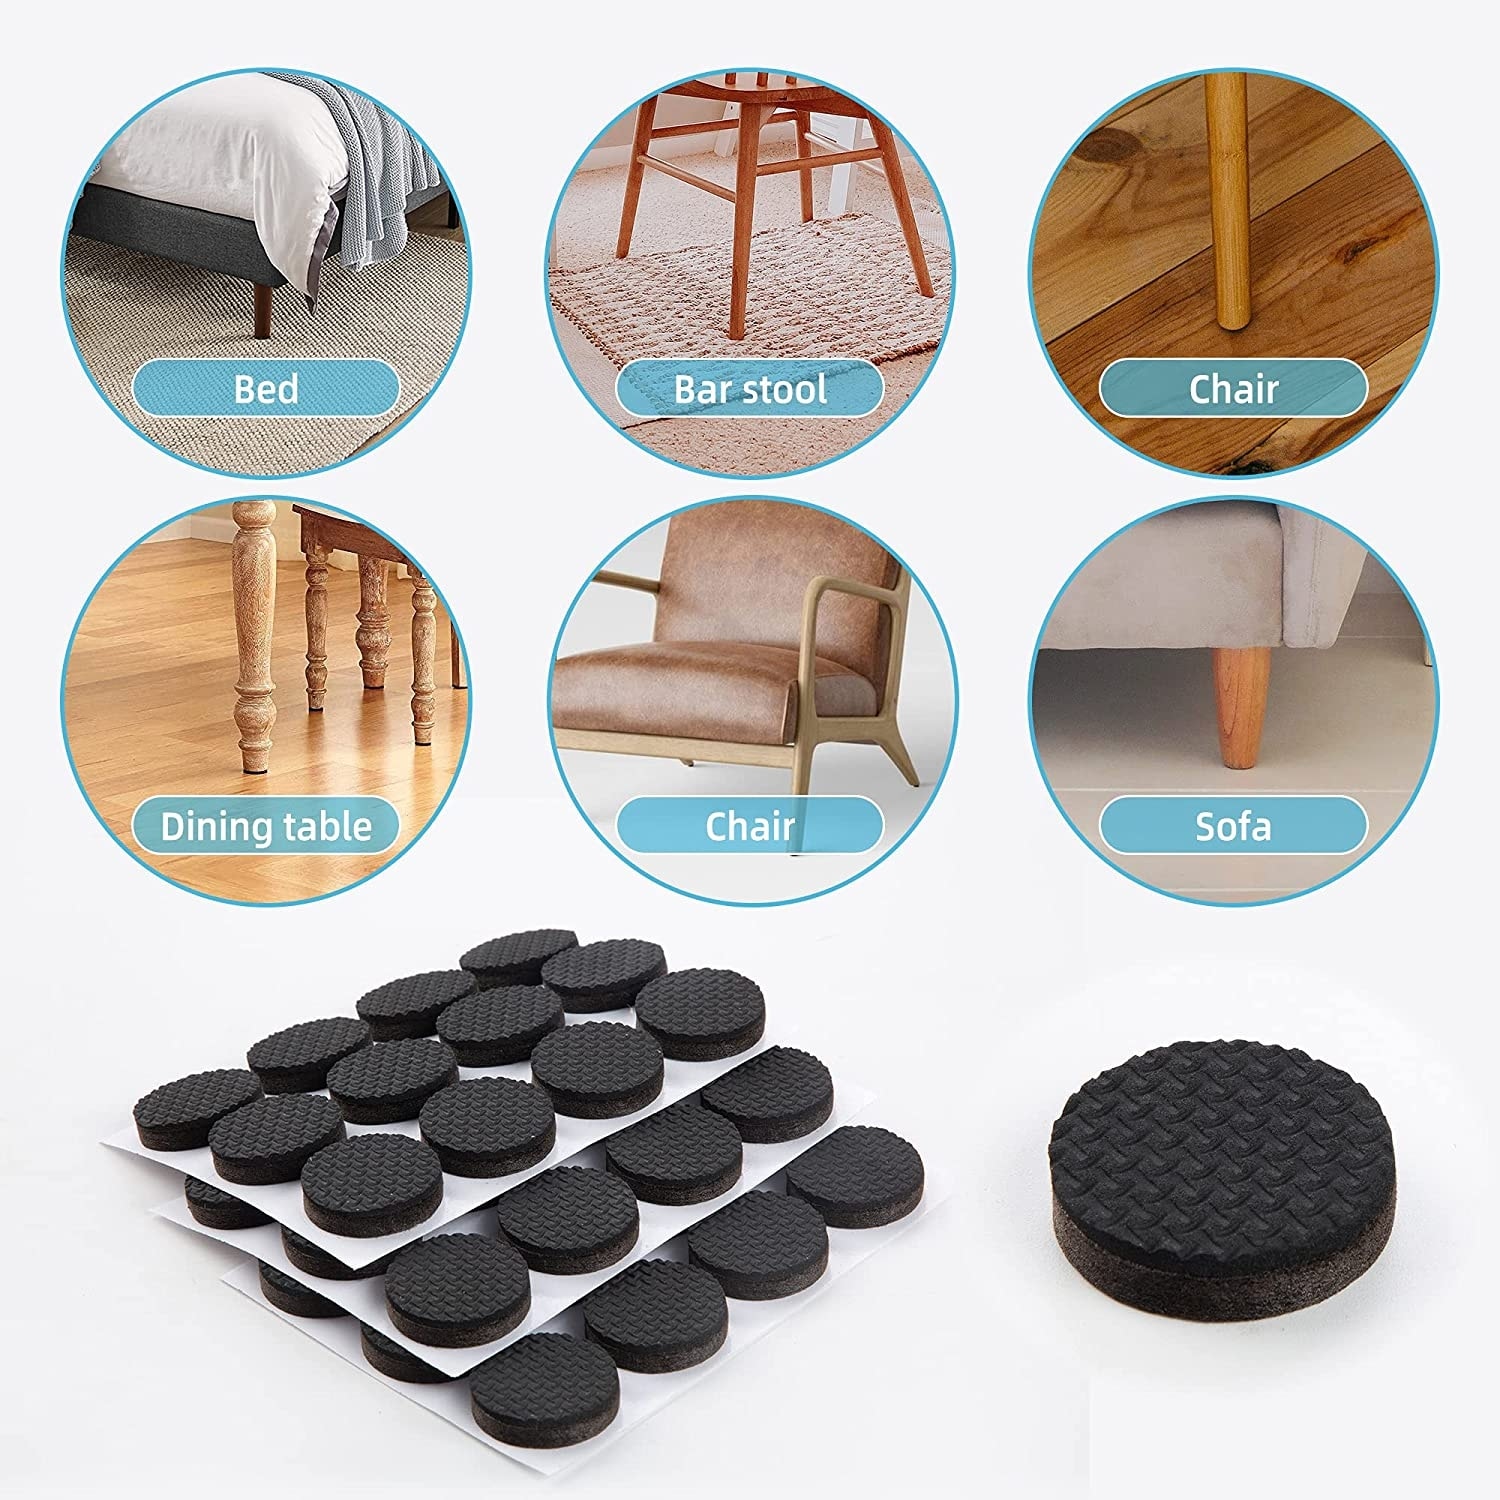 Non Slip Furniture Grippers Premium 8 Pcs 2 Furniture Pads! Best Selfadhesive Rubber Feet for Furniture Feet Ideal Non Skid Furniture Floor Protectors